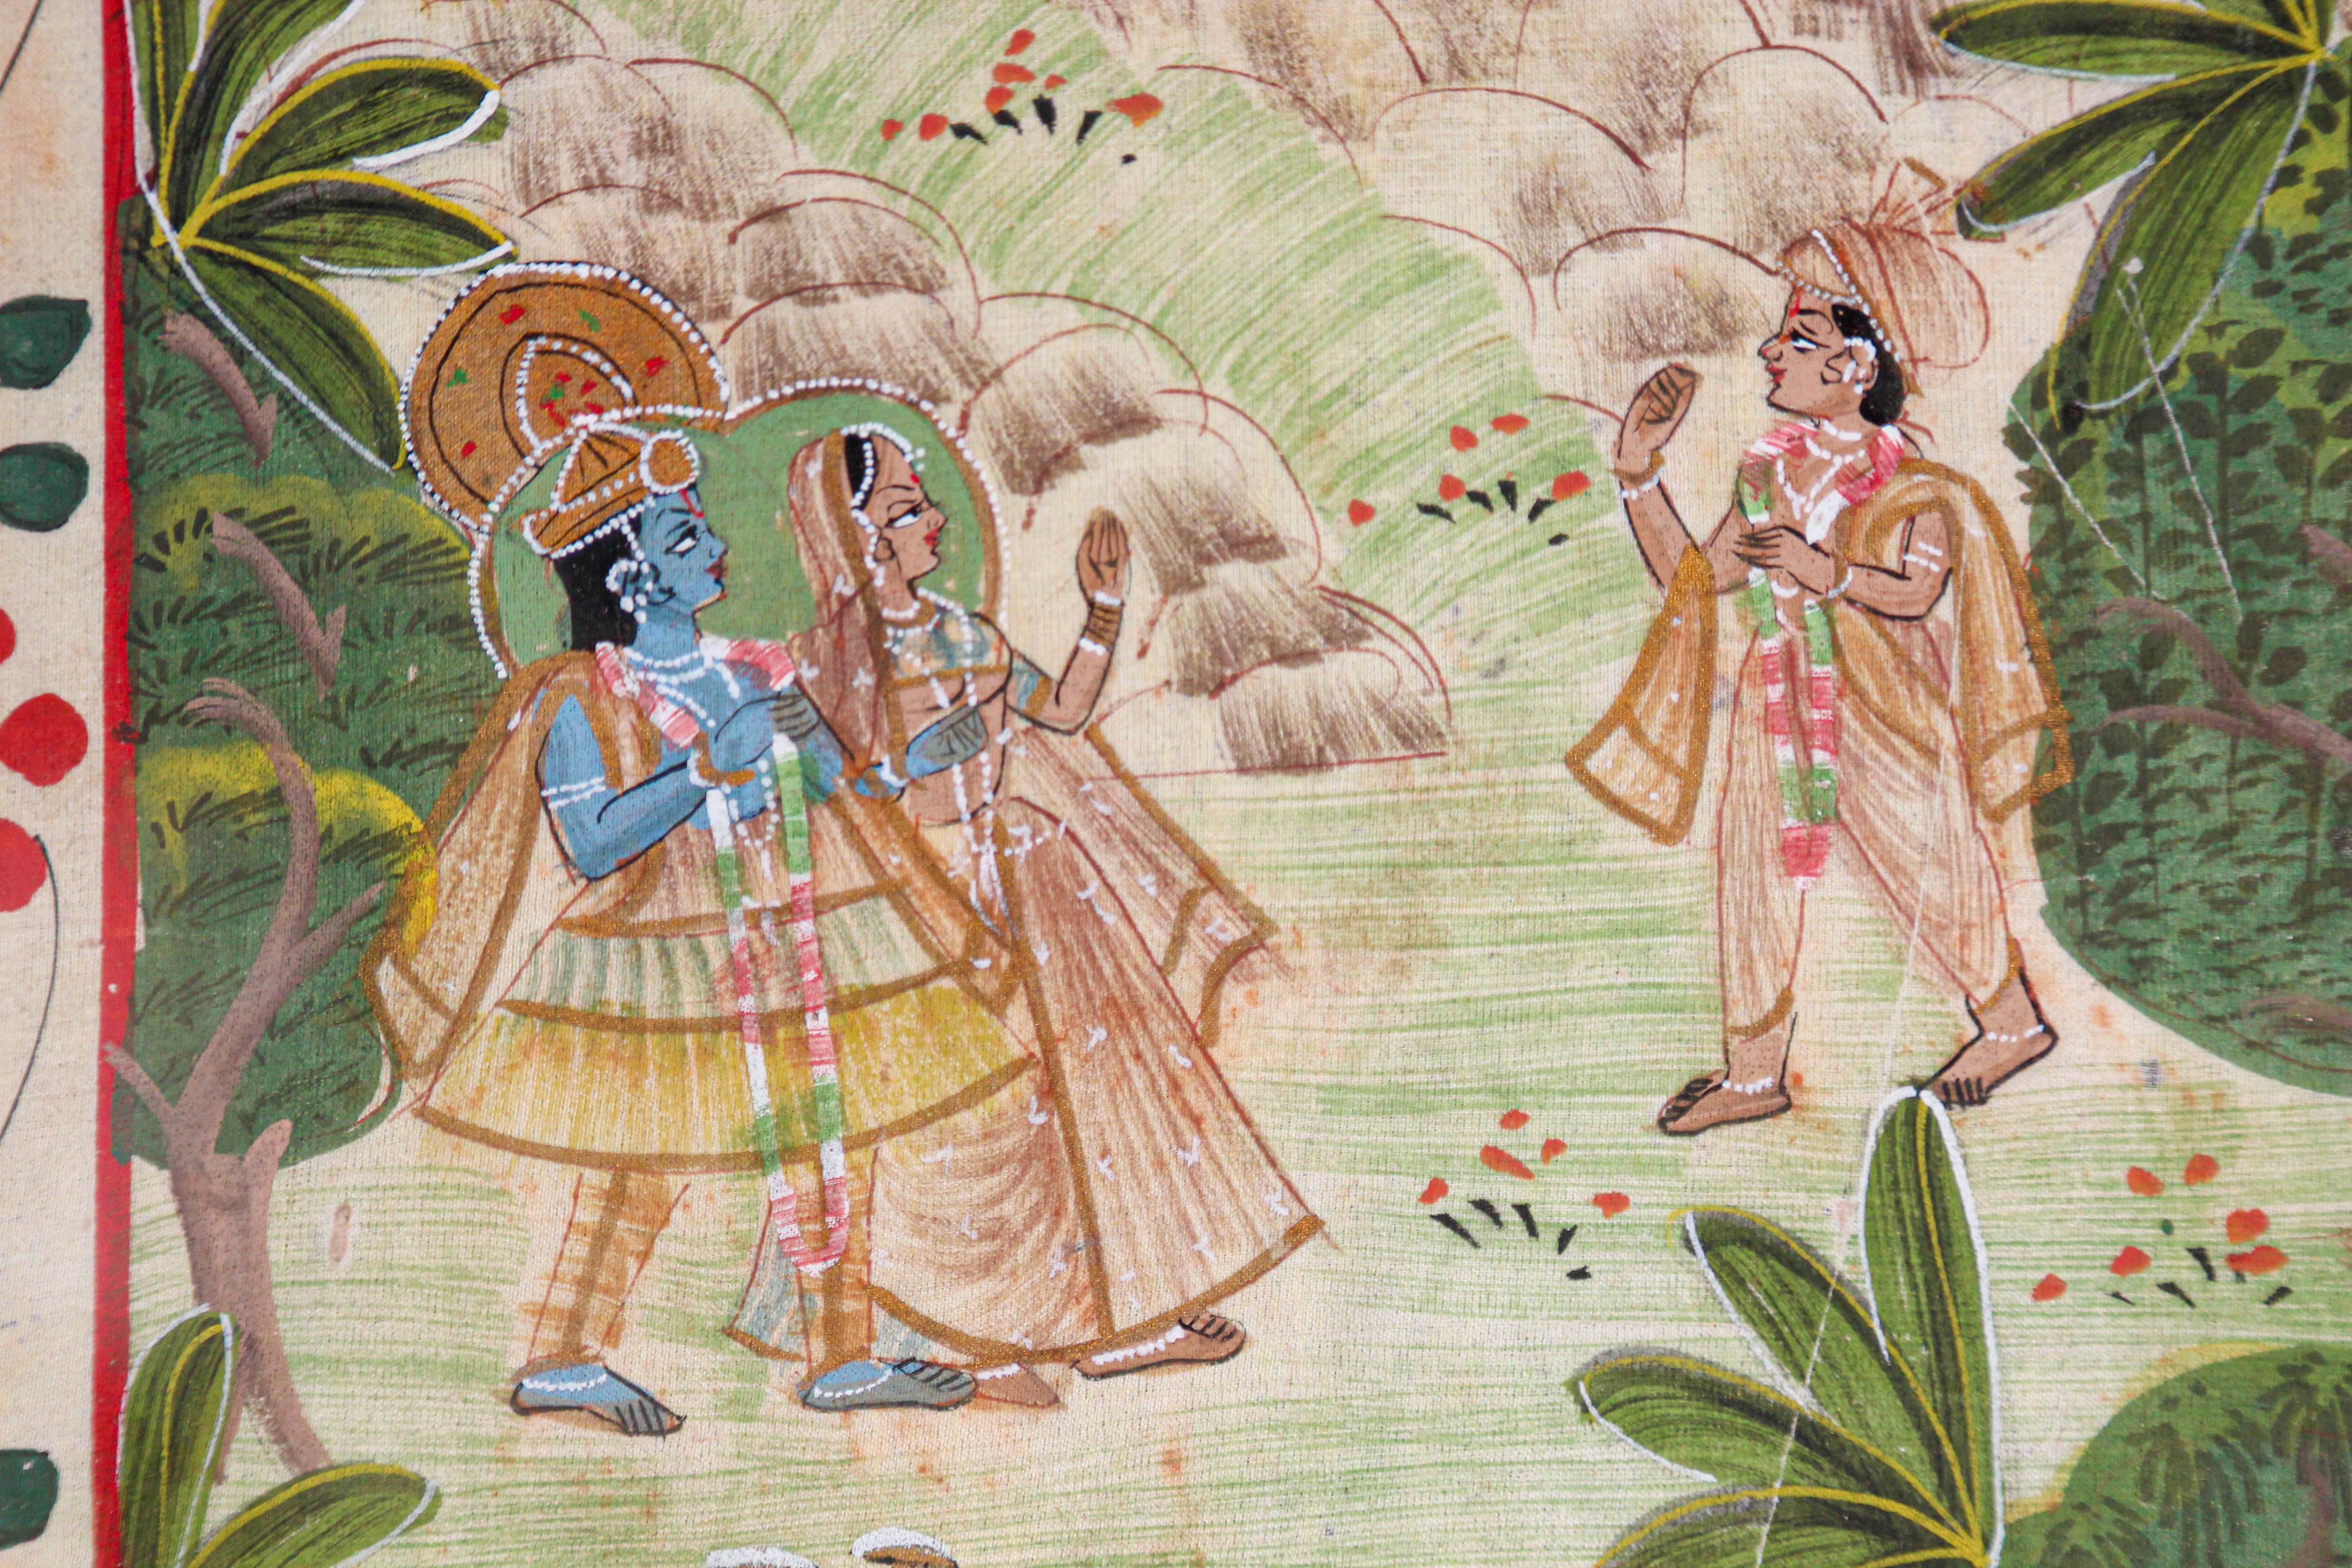 Hand-Painted Krishna, Radha, and the Gopis Meet a Young Prince, Picchawai Painting